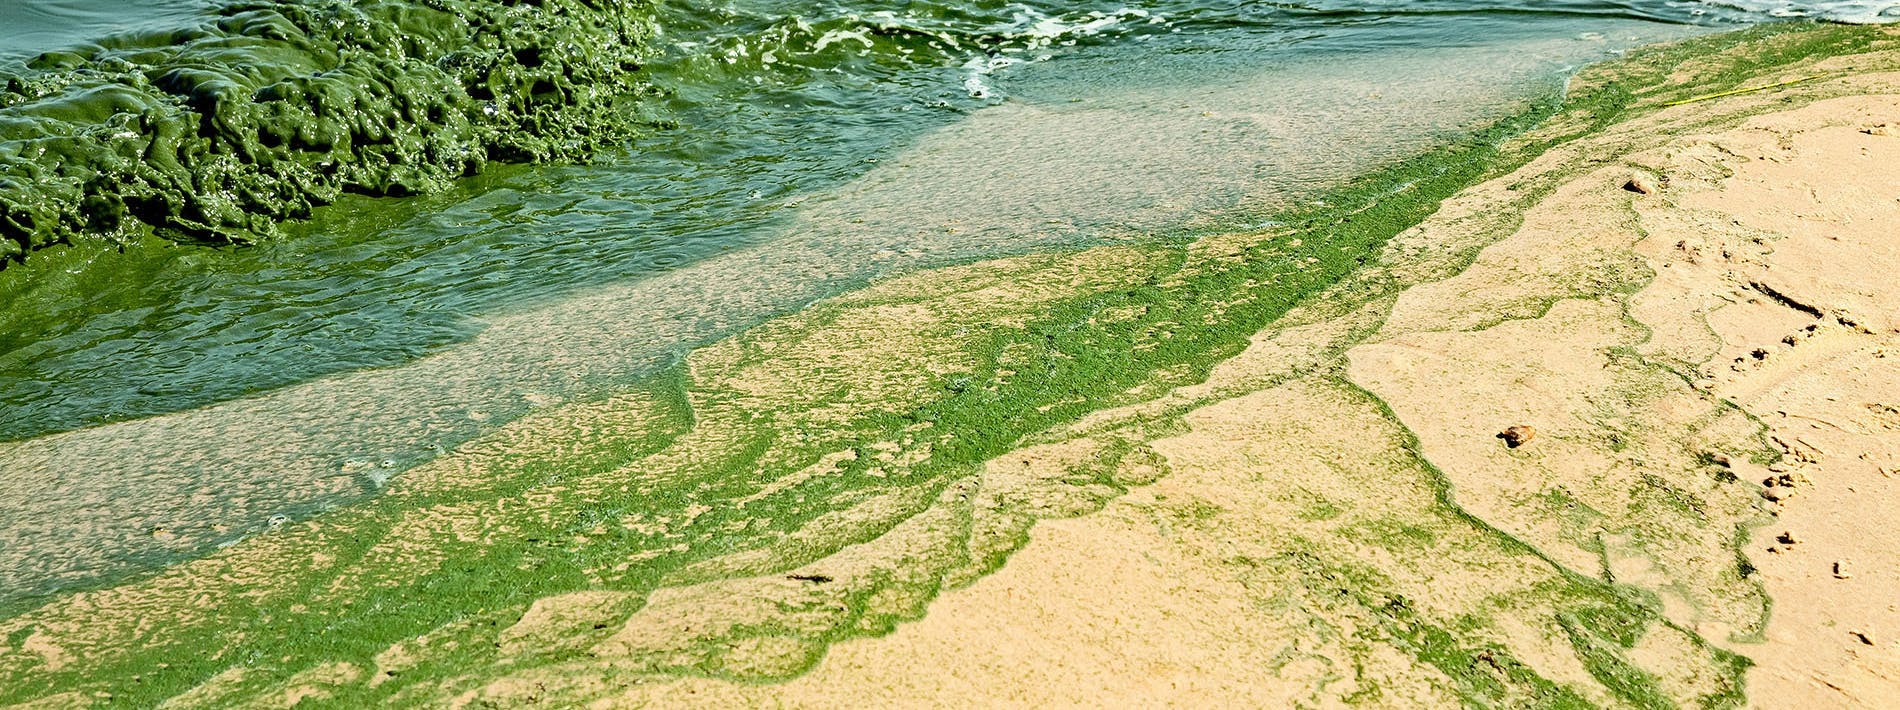 The Growing Concern of Harmful Algal Blooms in Our Ecosystems